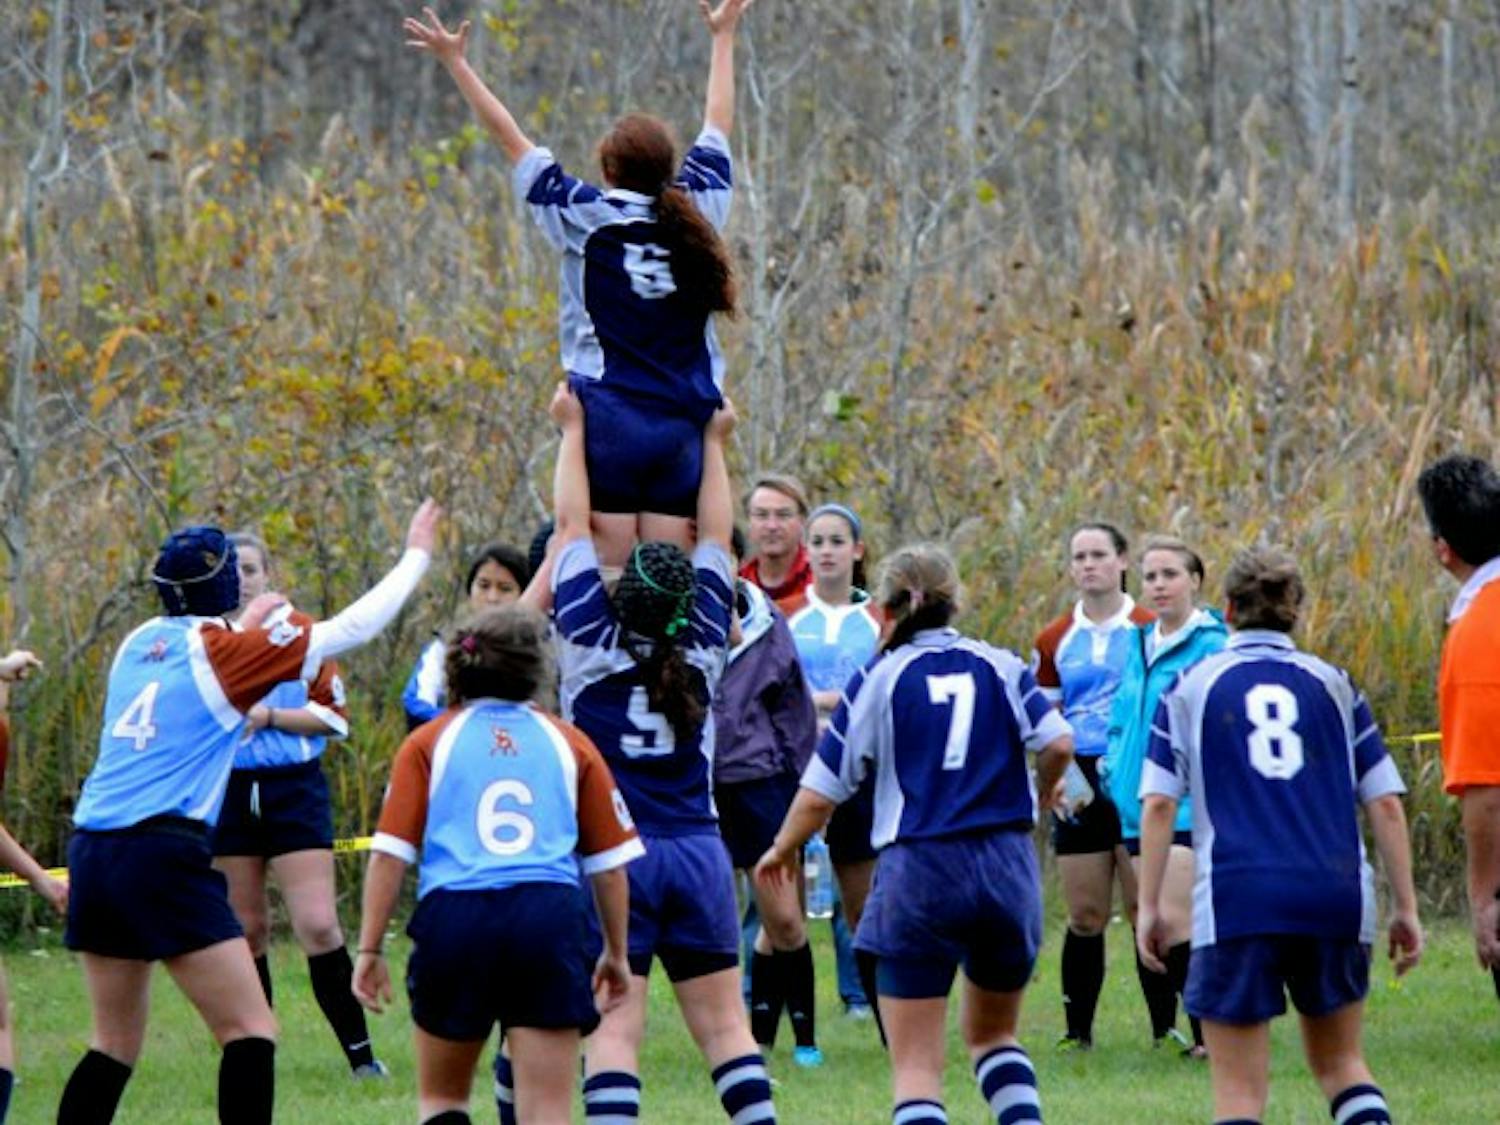 WomensRugbyPhoto